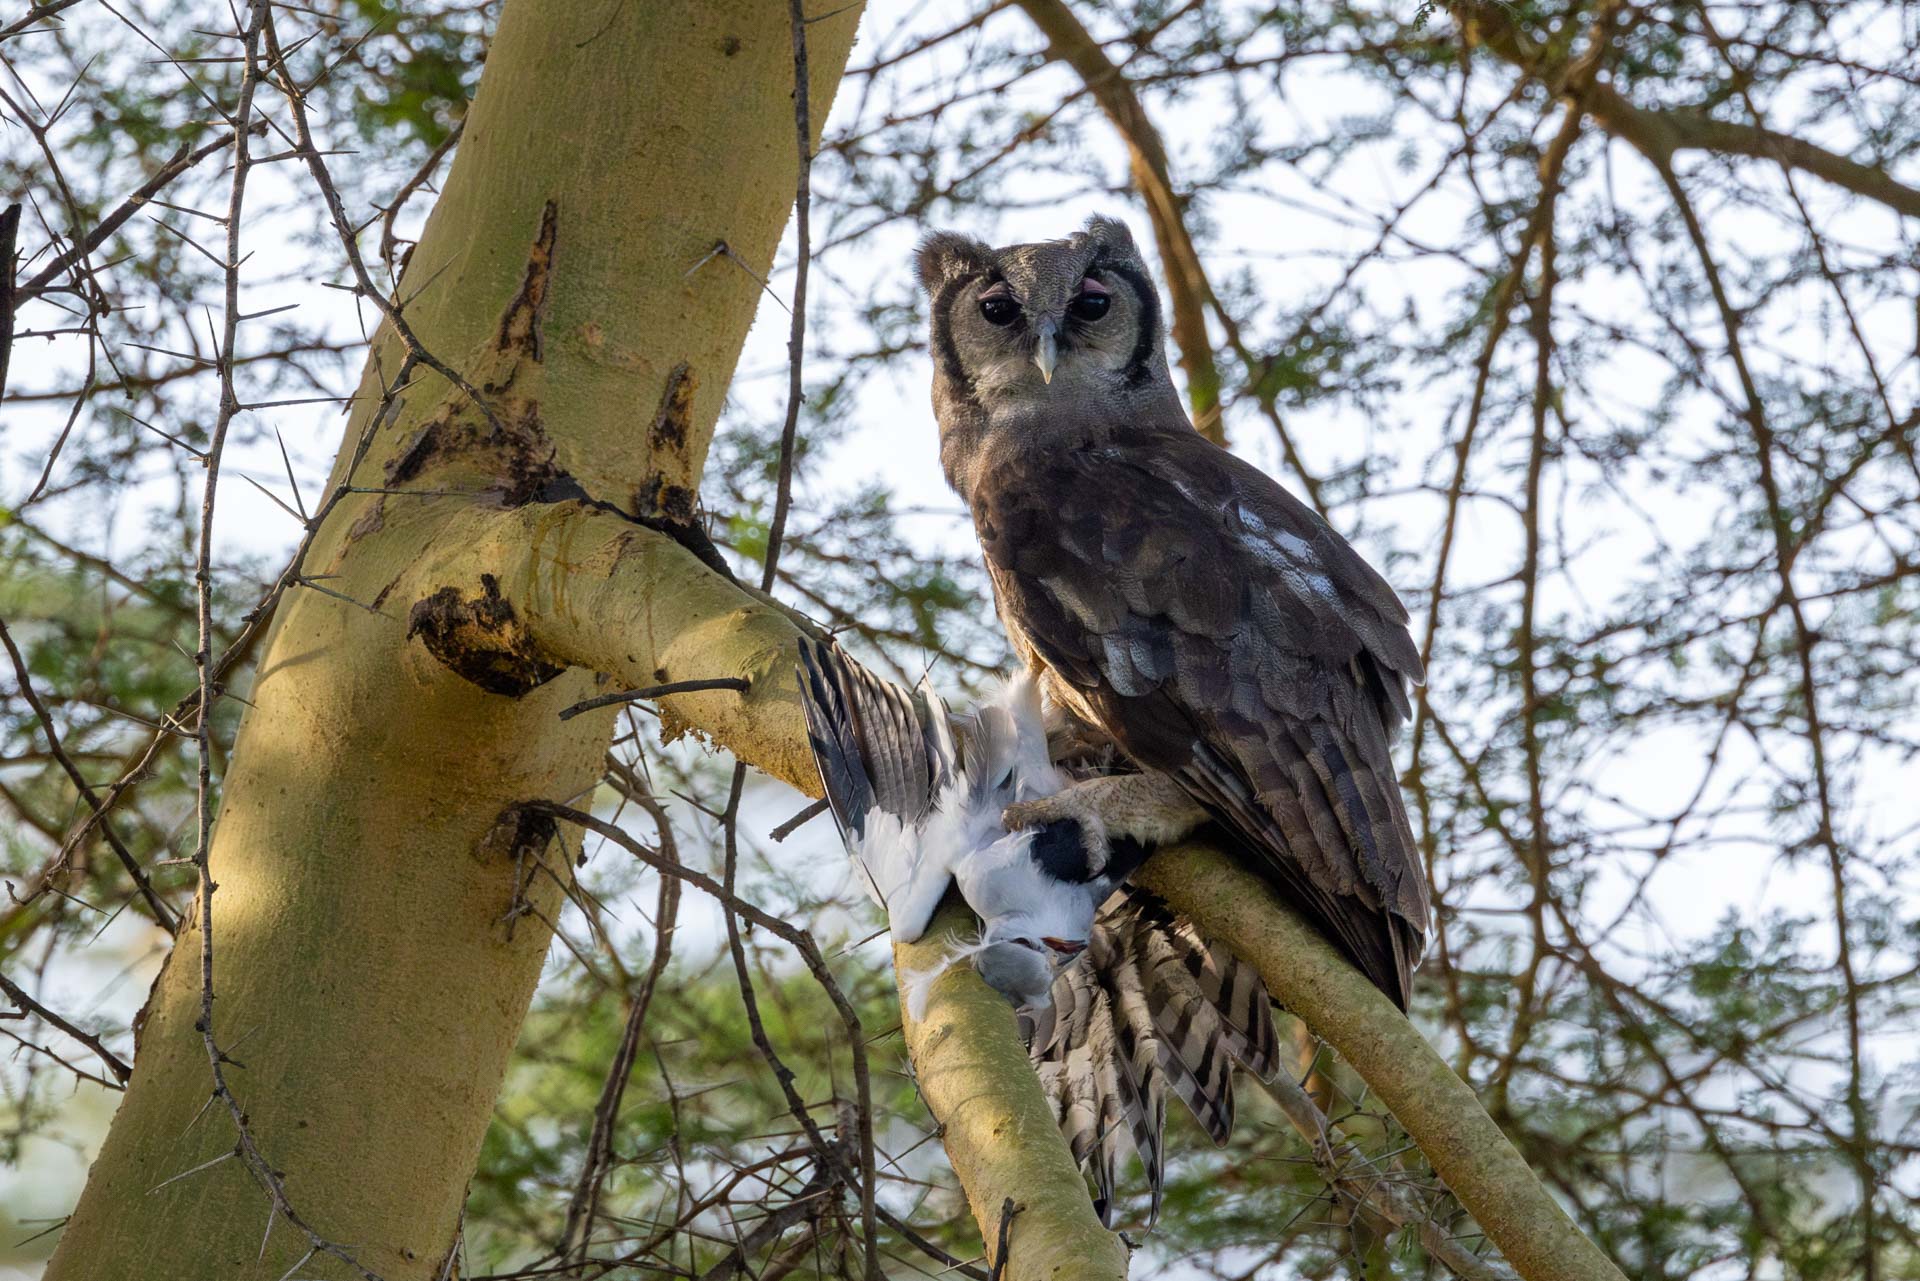 Above: A Verreaux's eagle-owl with its catch of the day